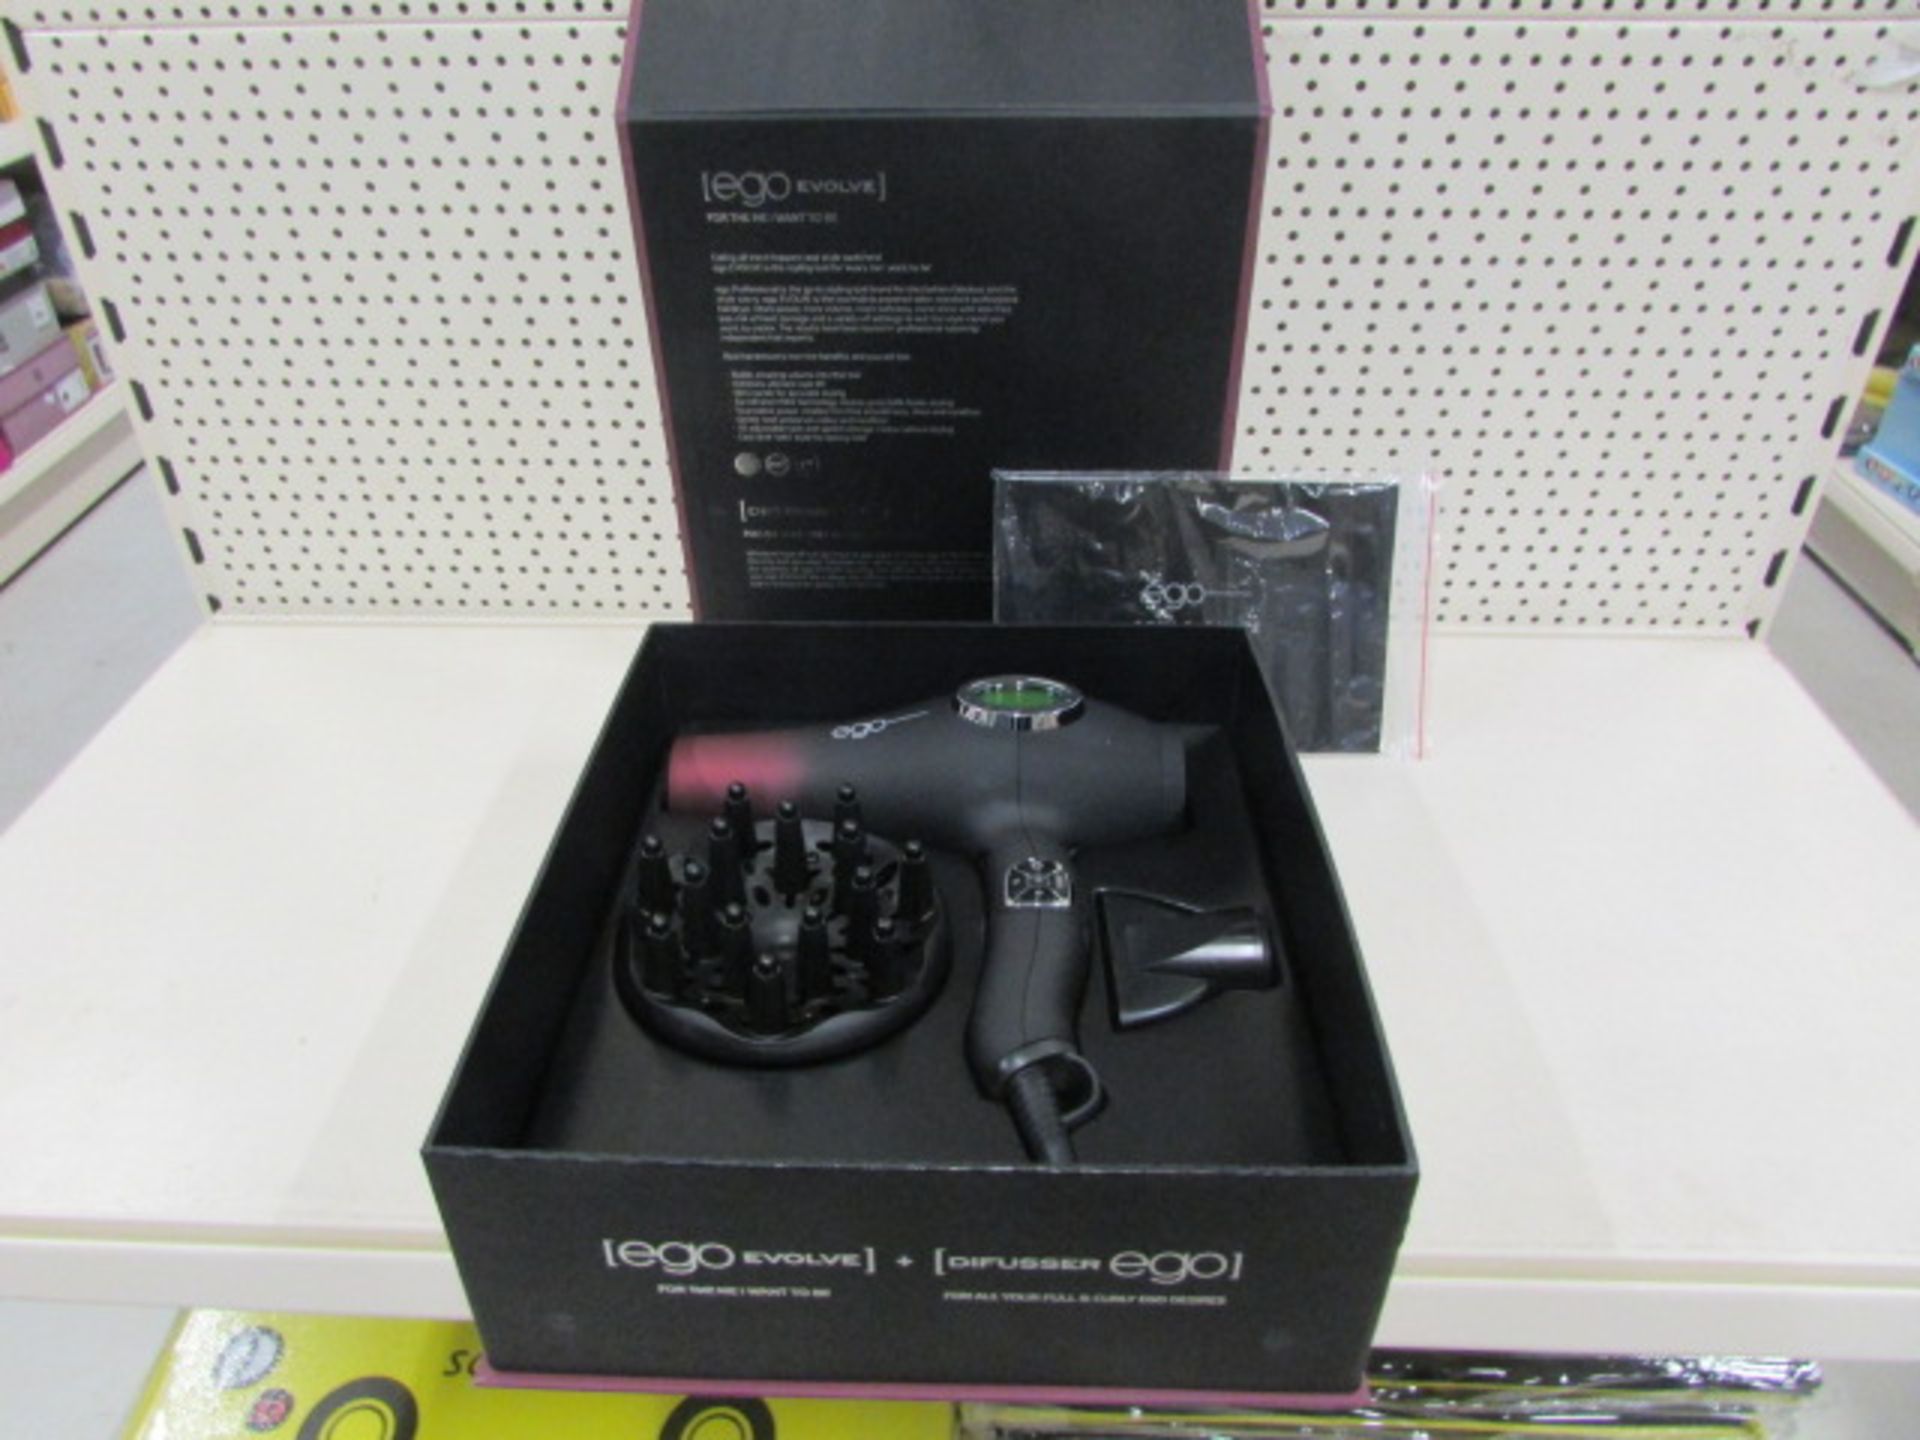 1 X Ego Professional Ego Evolve Hairdryer + Difusser [Brand New] - Image 5 of 6